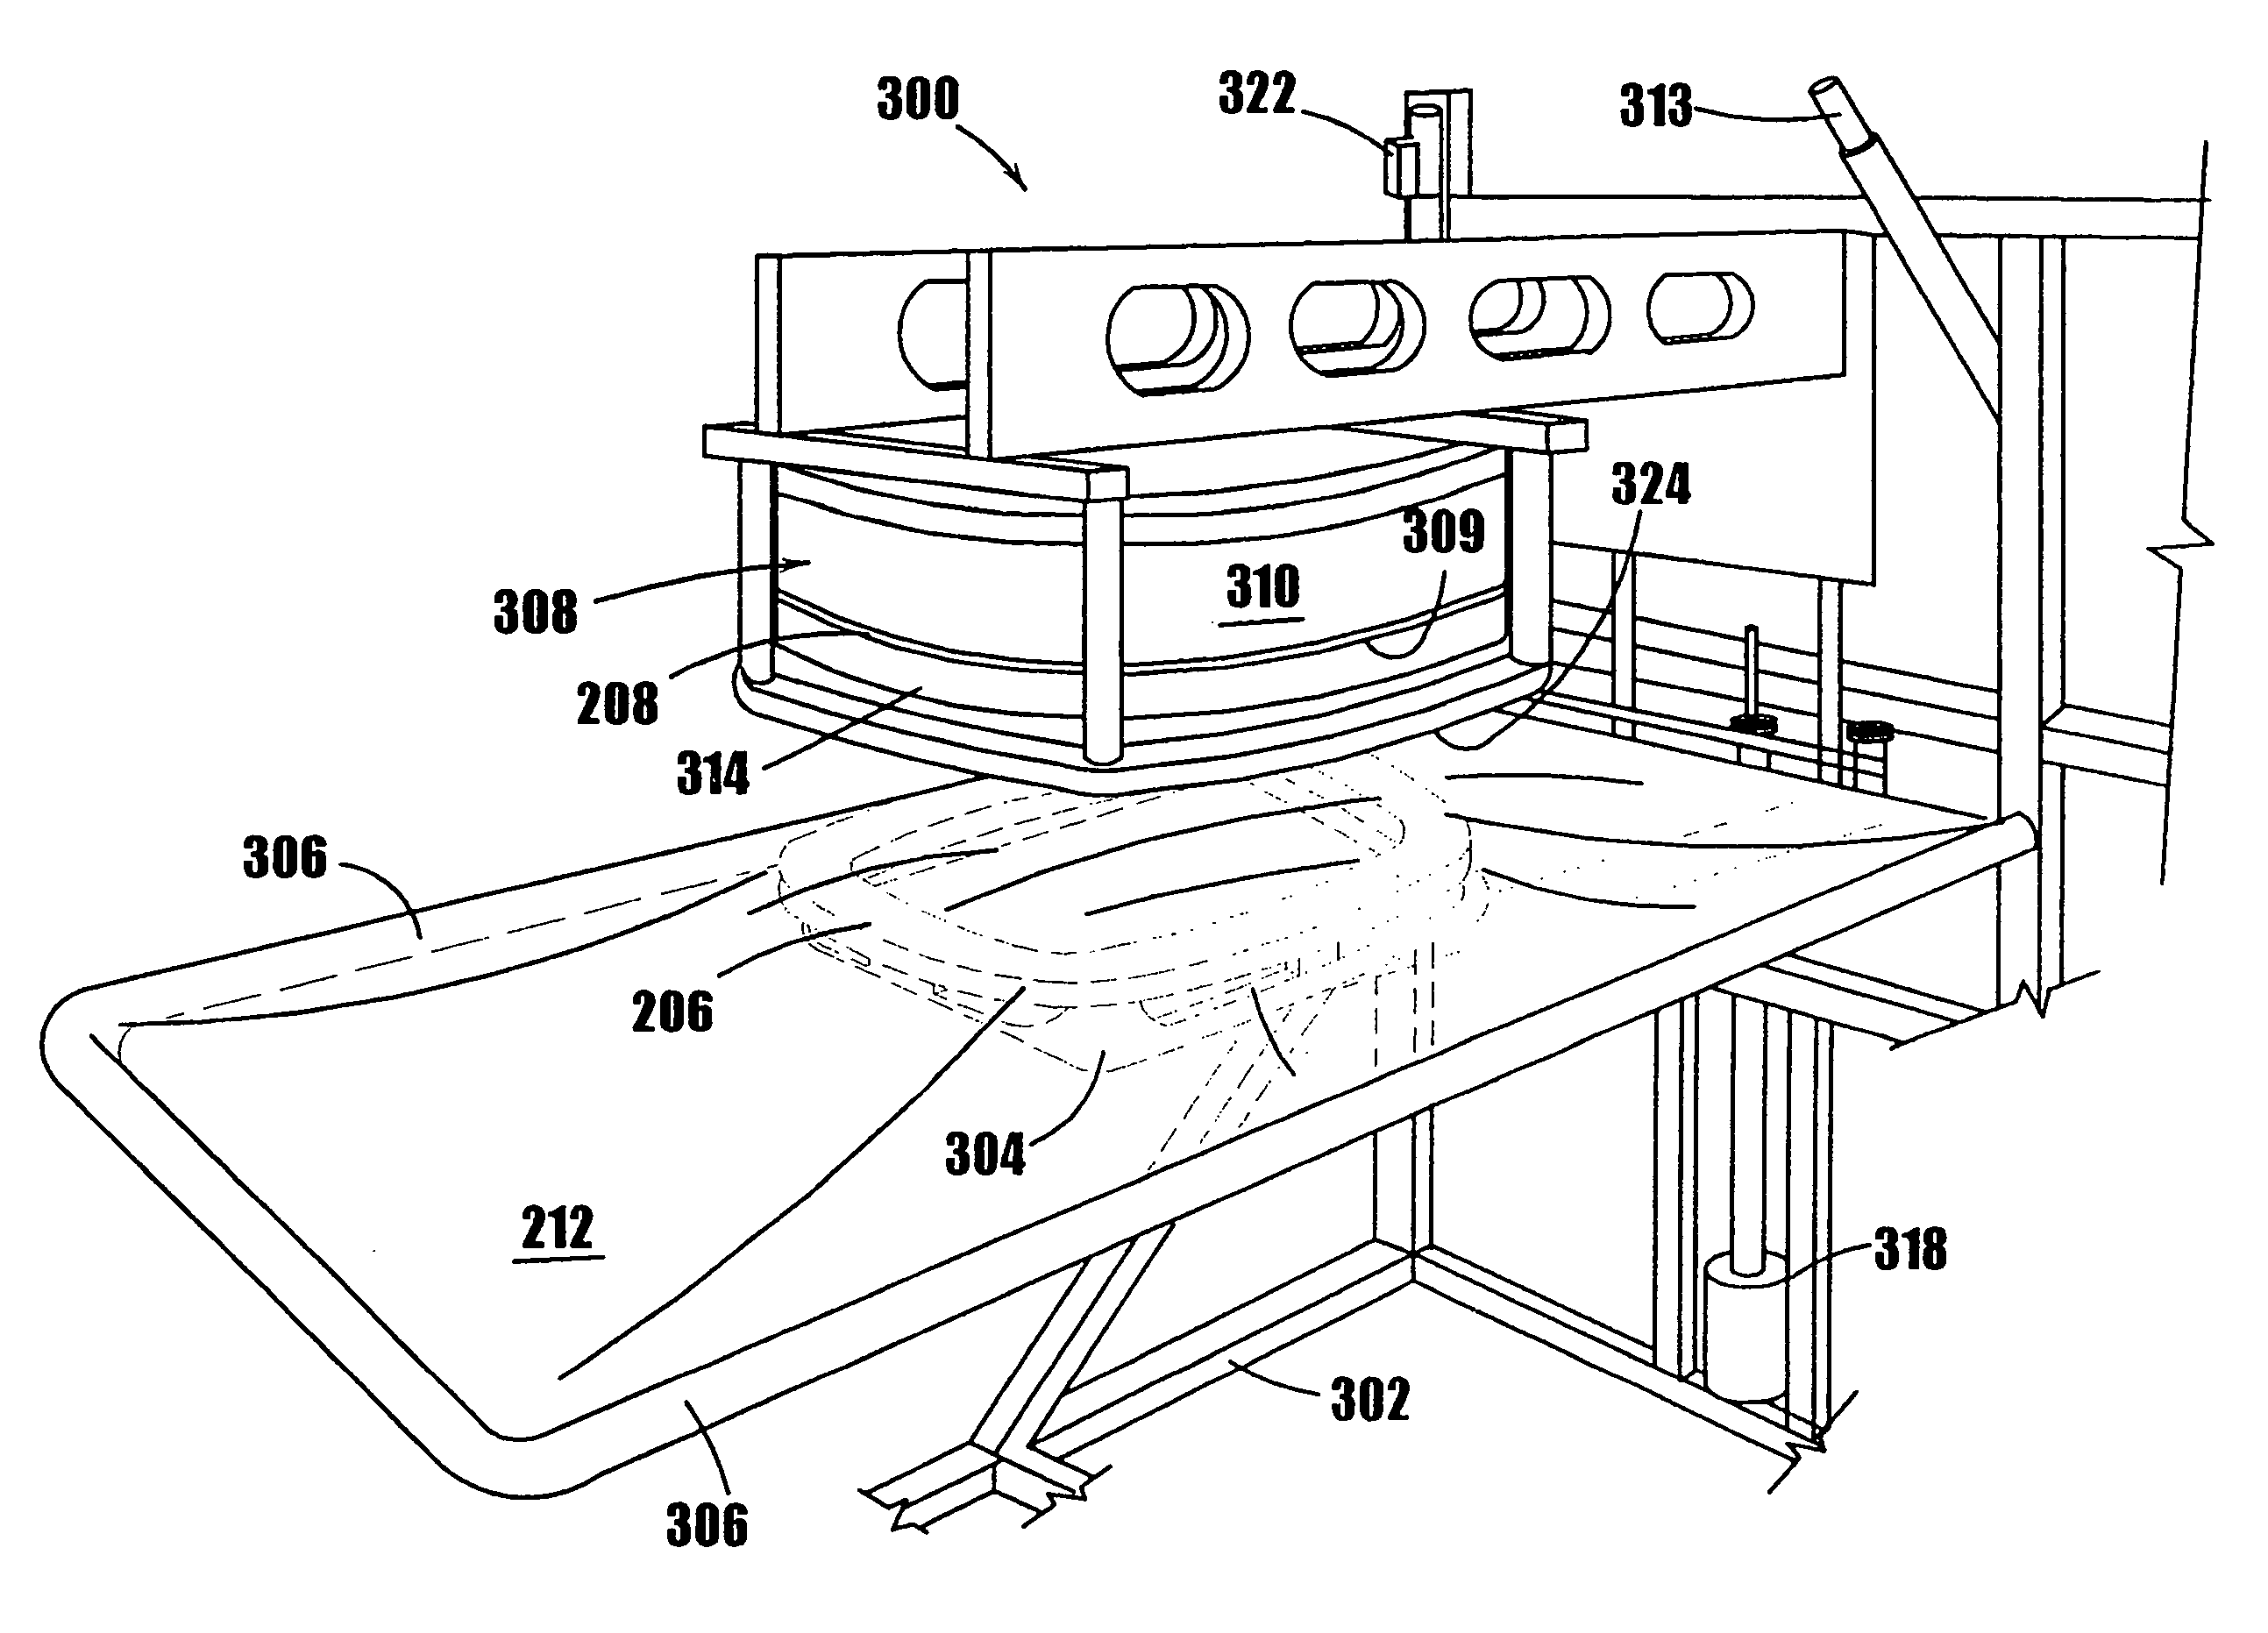 Transfer port and method for transferring sterile items